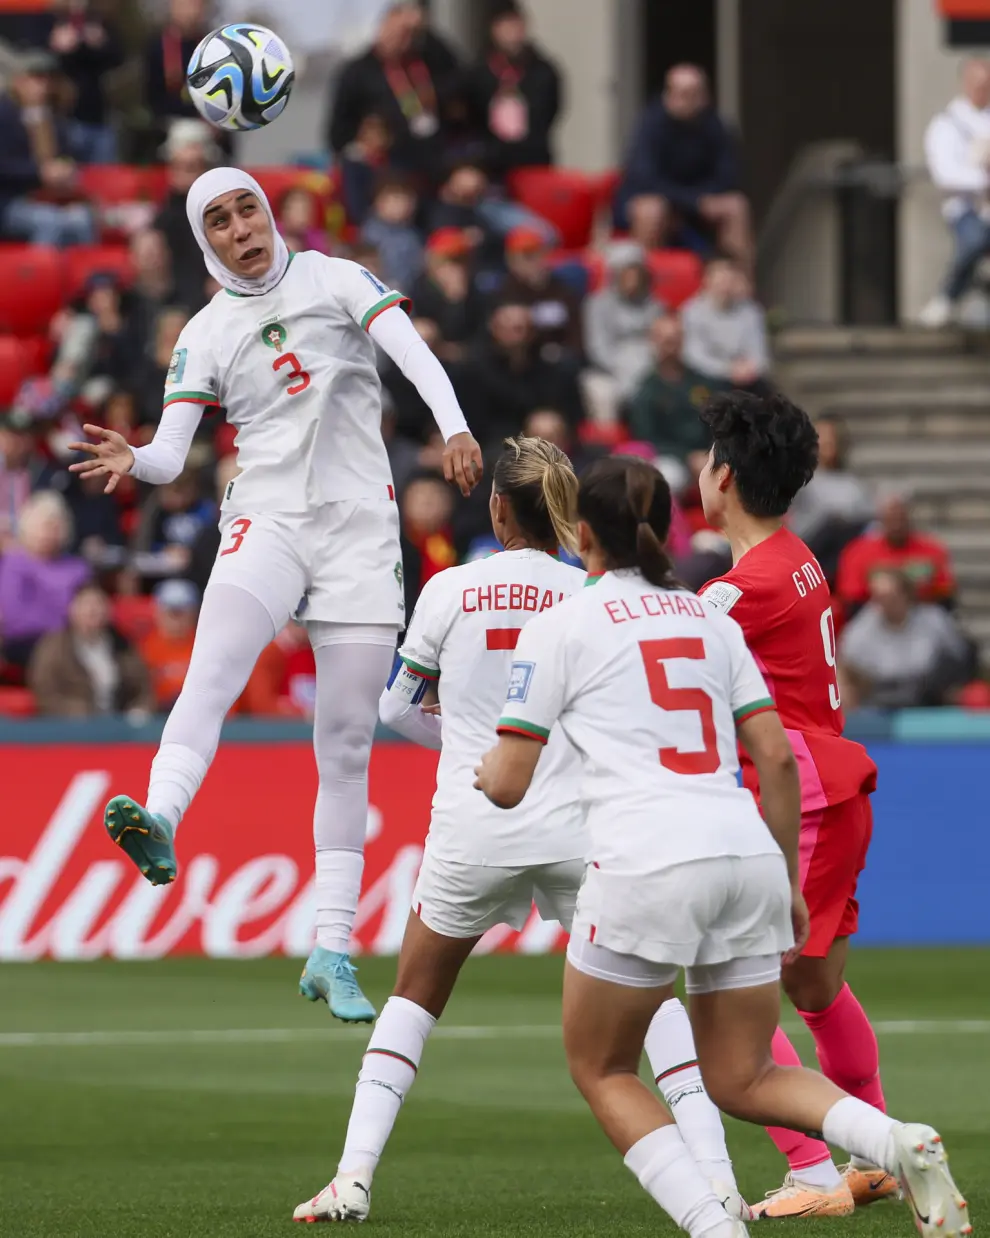 Morocco's Nouhaila Benzina heads the ball during the Women's World Cup Group H soccer match between South Korea and Morocco in Adelaide, Australia, Sunday, July 30, 2023. (AP Photo/James Elsby)